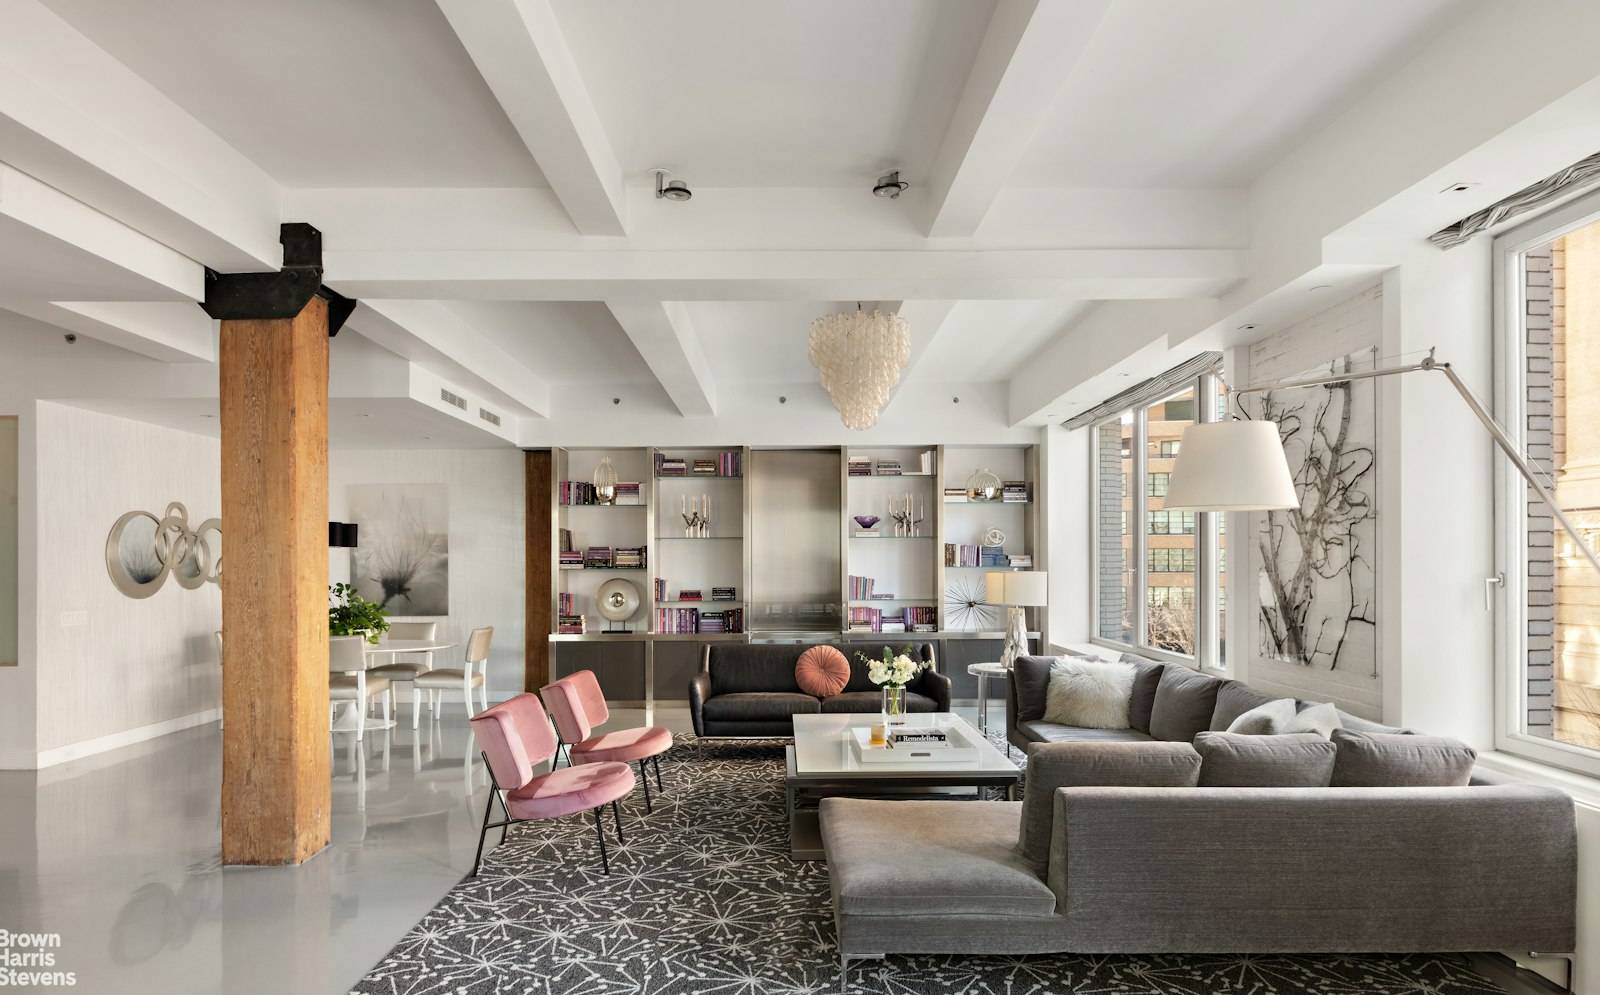 This pristine 3, 250SF condominium loft is located right at the crossroads of Soho and Hudson Square and offers clean modern lines, a spacious 3 bedroom, 3.